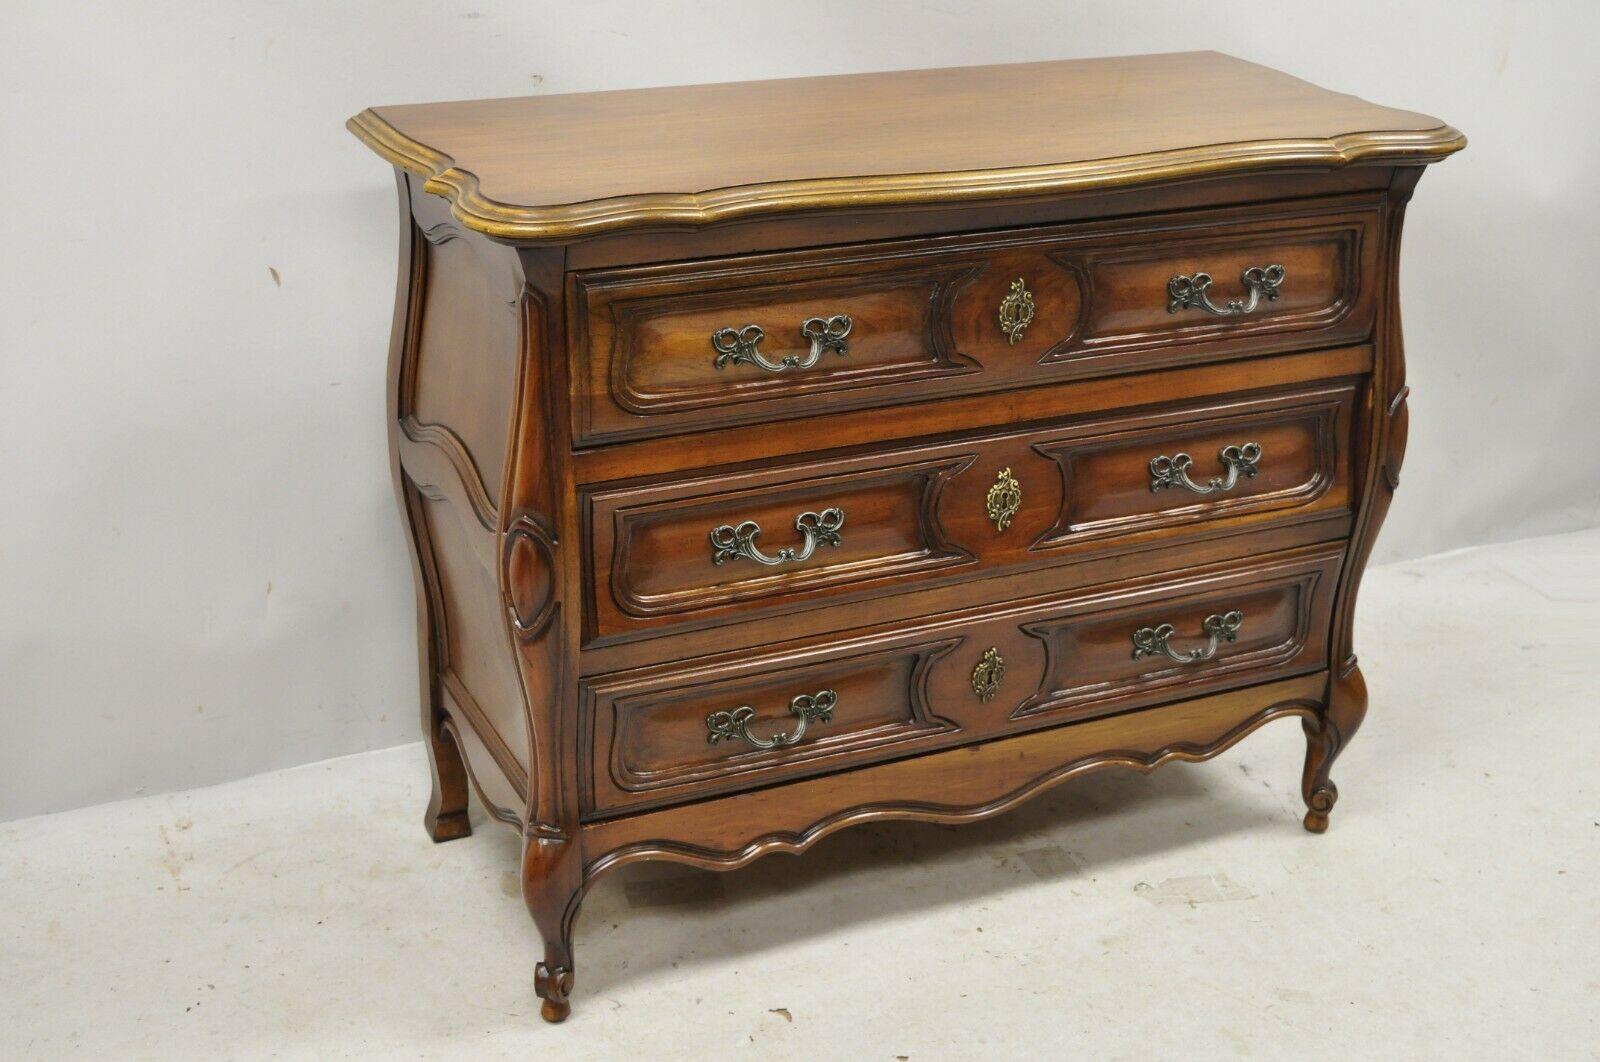 French Provincial Louis XV Country Style Sienna Cherry Bombe Commode Chest Dresser. Item features panel carved sides, solid wood construction, beautiful wood grain, nicely carved details, 3 dovetailed drawers, cabriole legs, solid brass hardware,